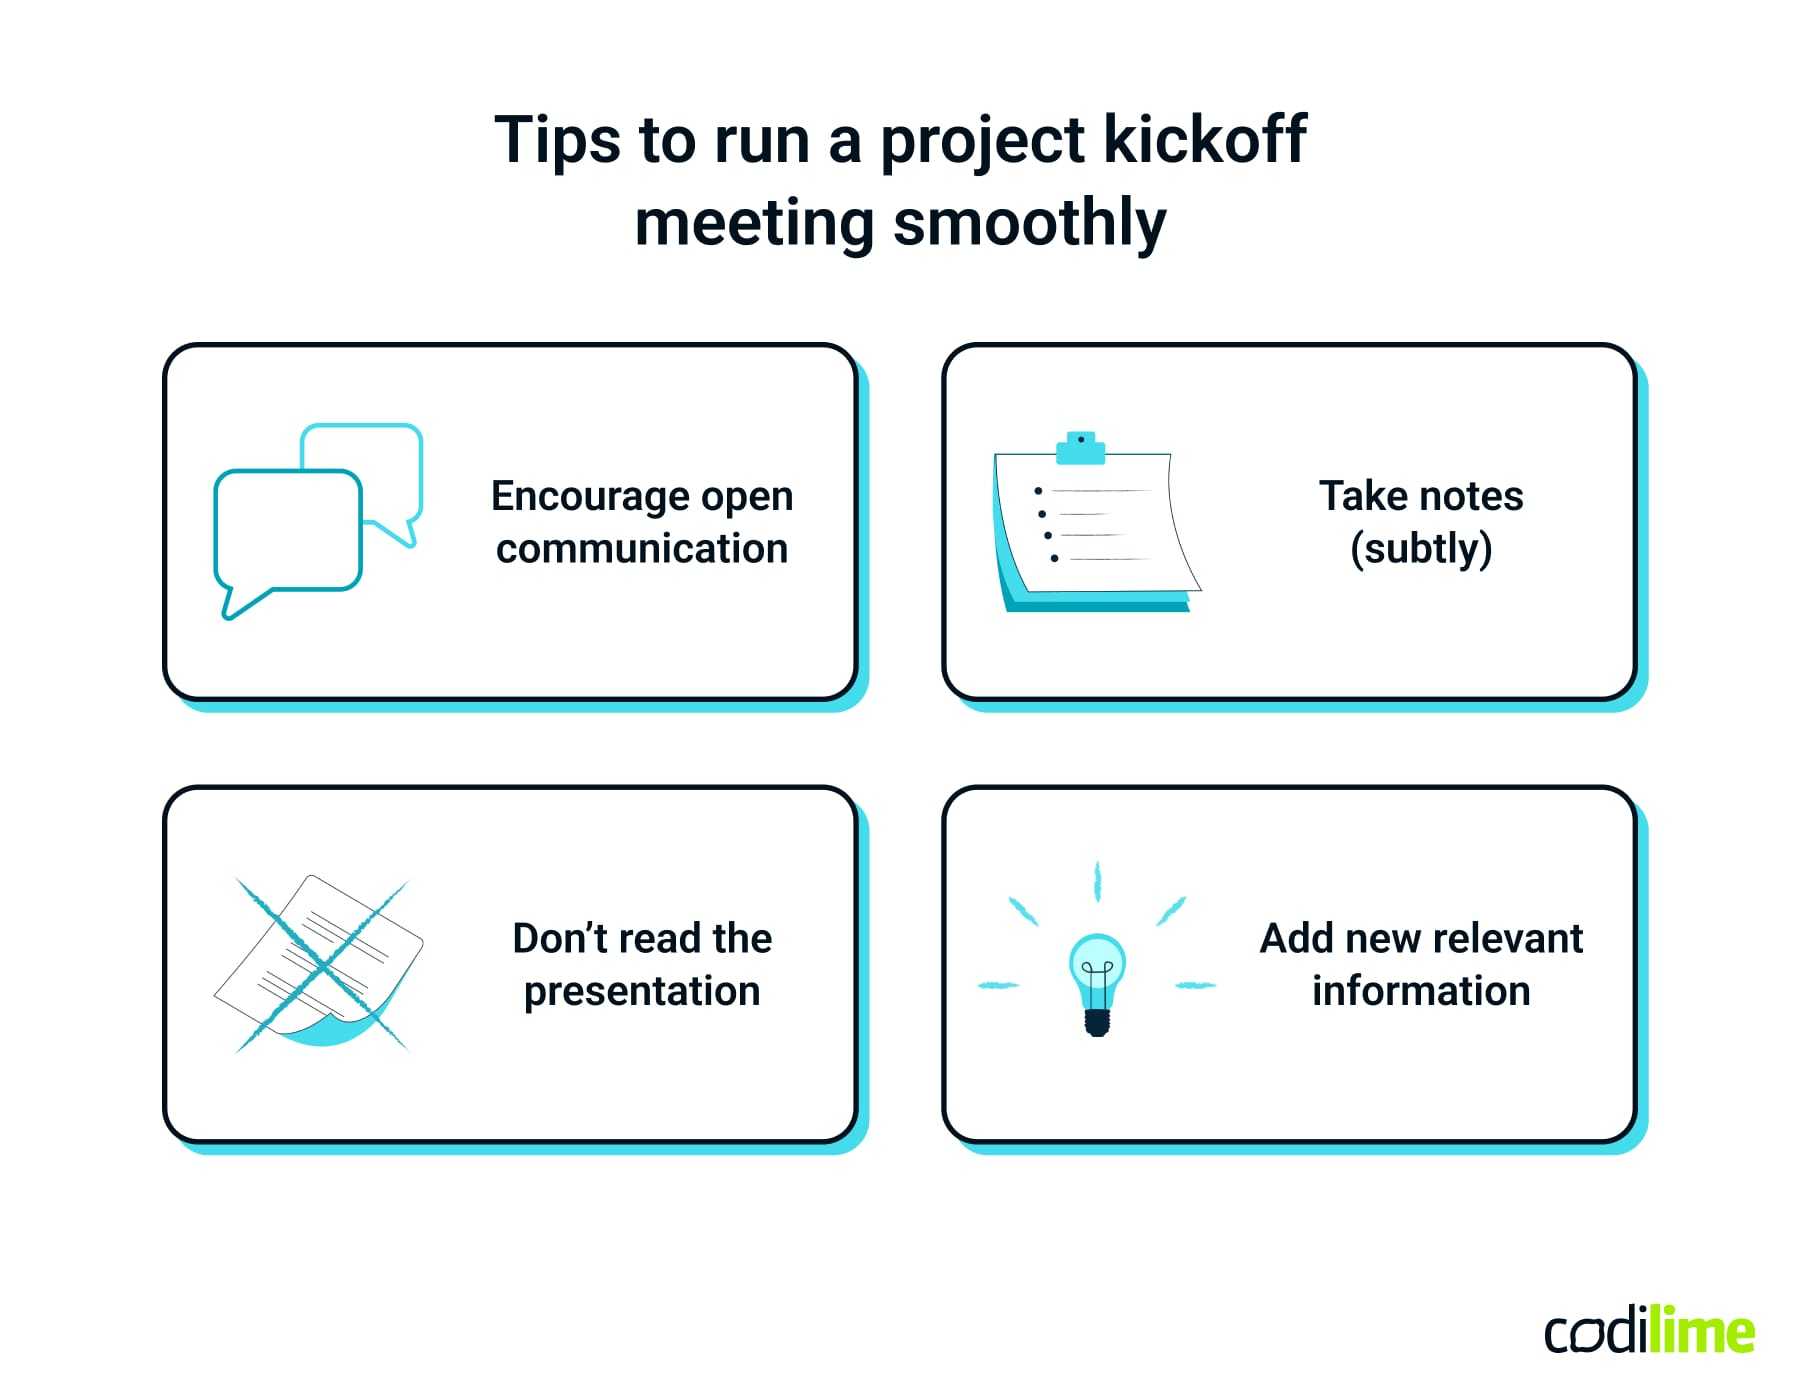 Tips for a smooth project kickoff meeting